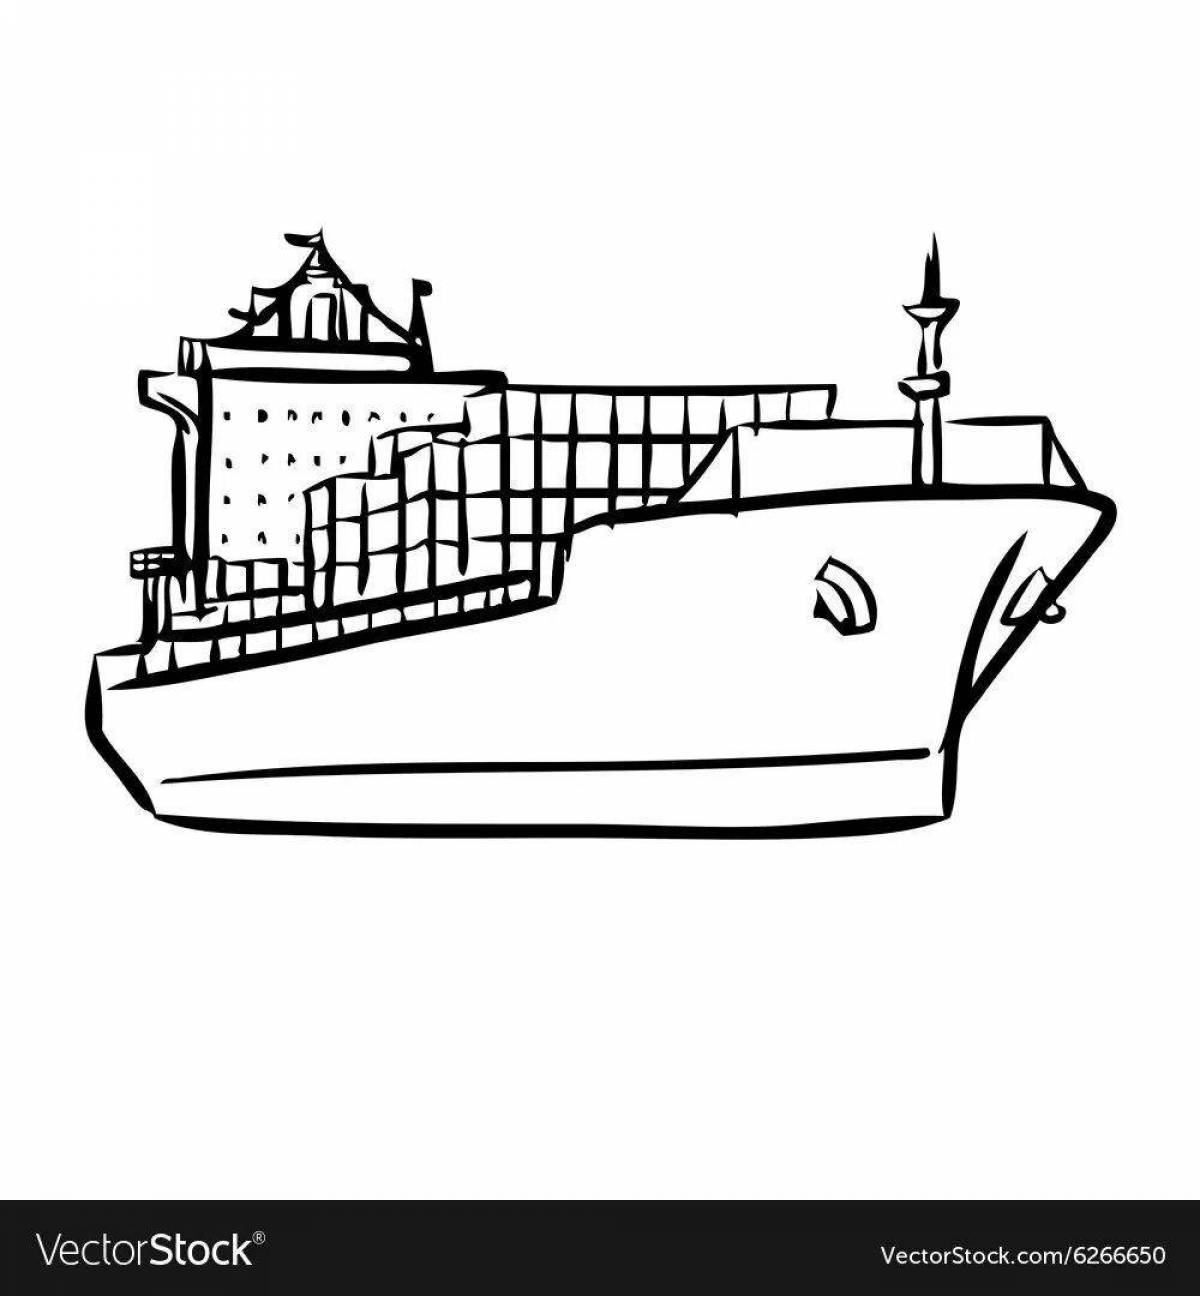 Majestic container ship coloring page